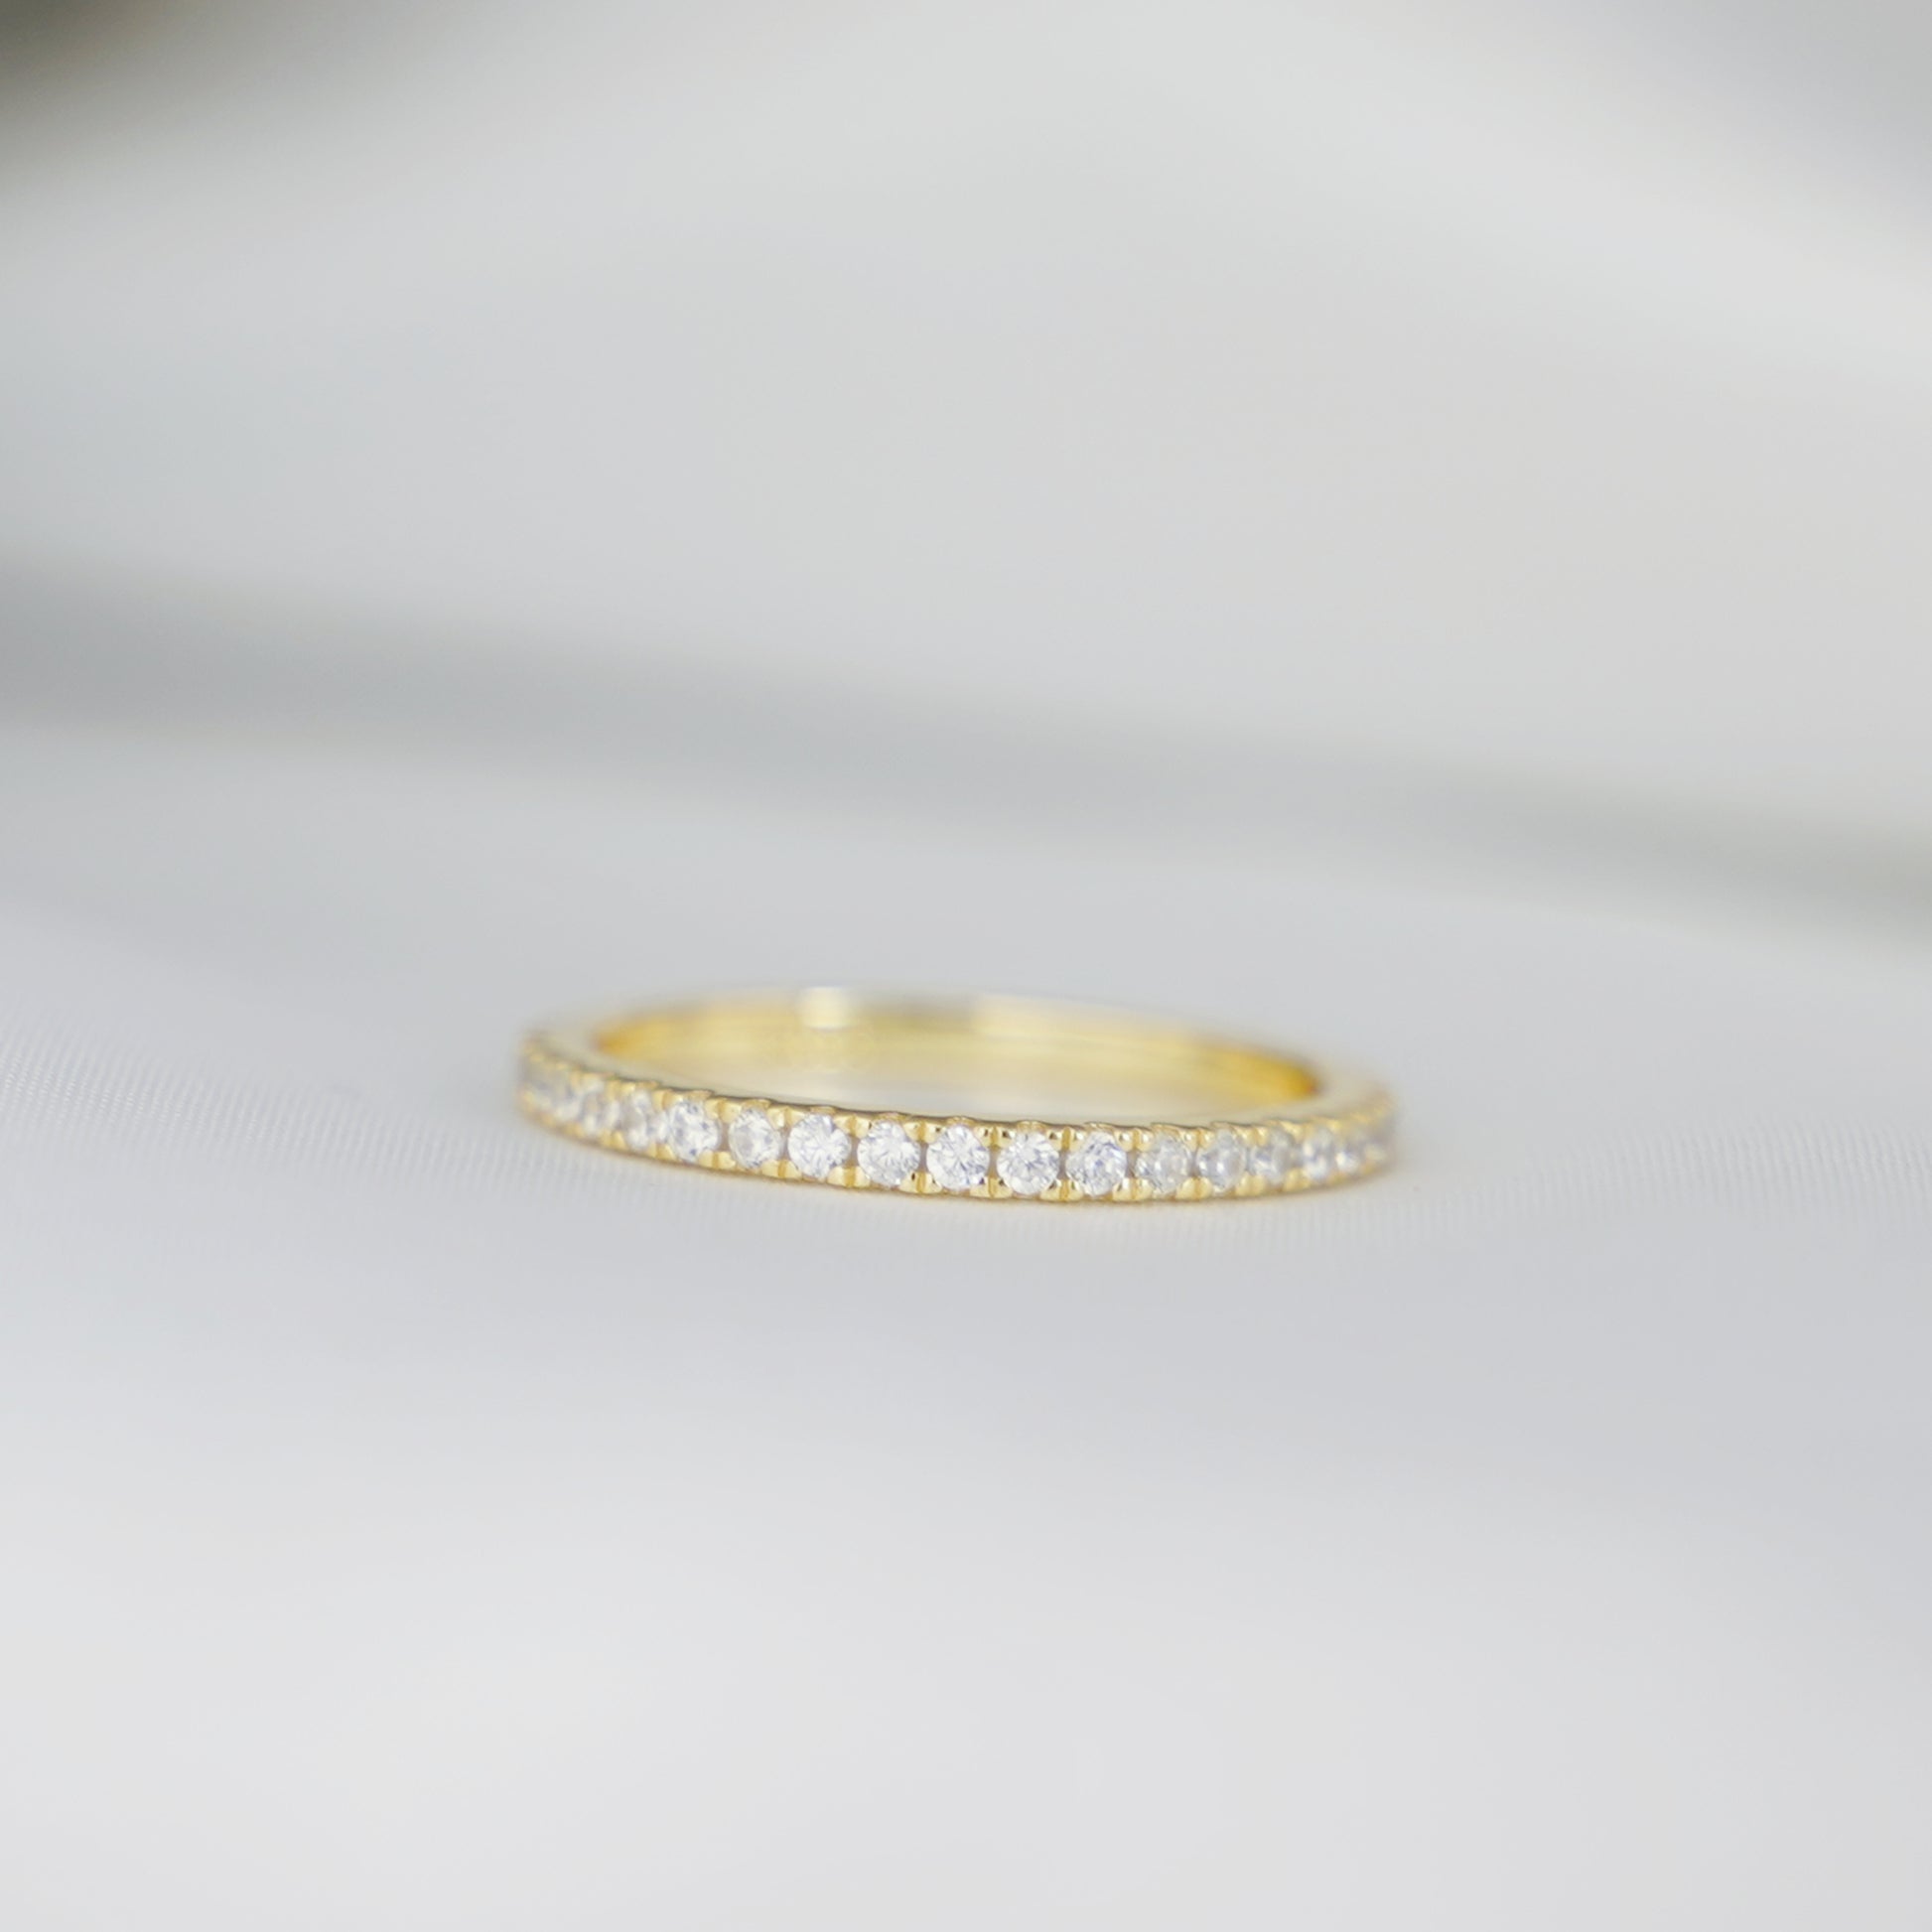 18K Gold on Sterling Silver Full Eternity 2mm Paved CZ Crystal Band Ring I - T - sugarkittenlondon